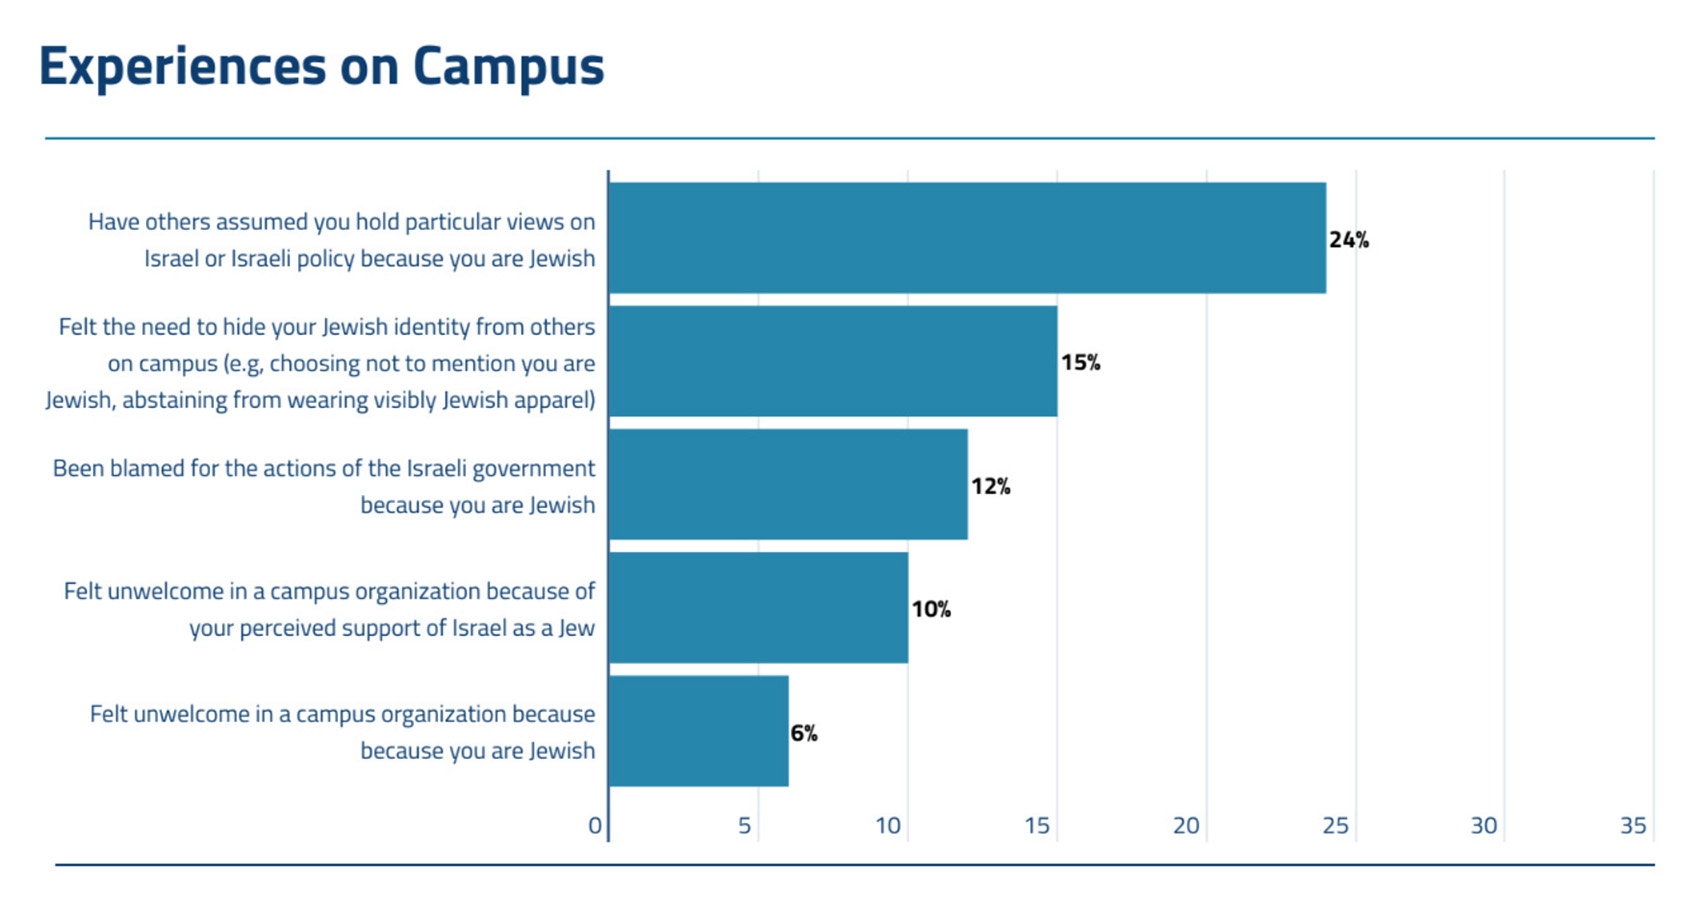 "Experiences on Campus" Graphic courtesy of Hillel International/ADL